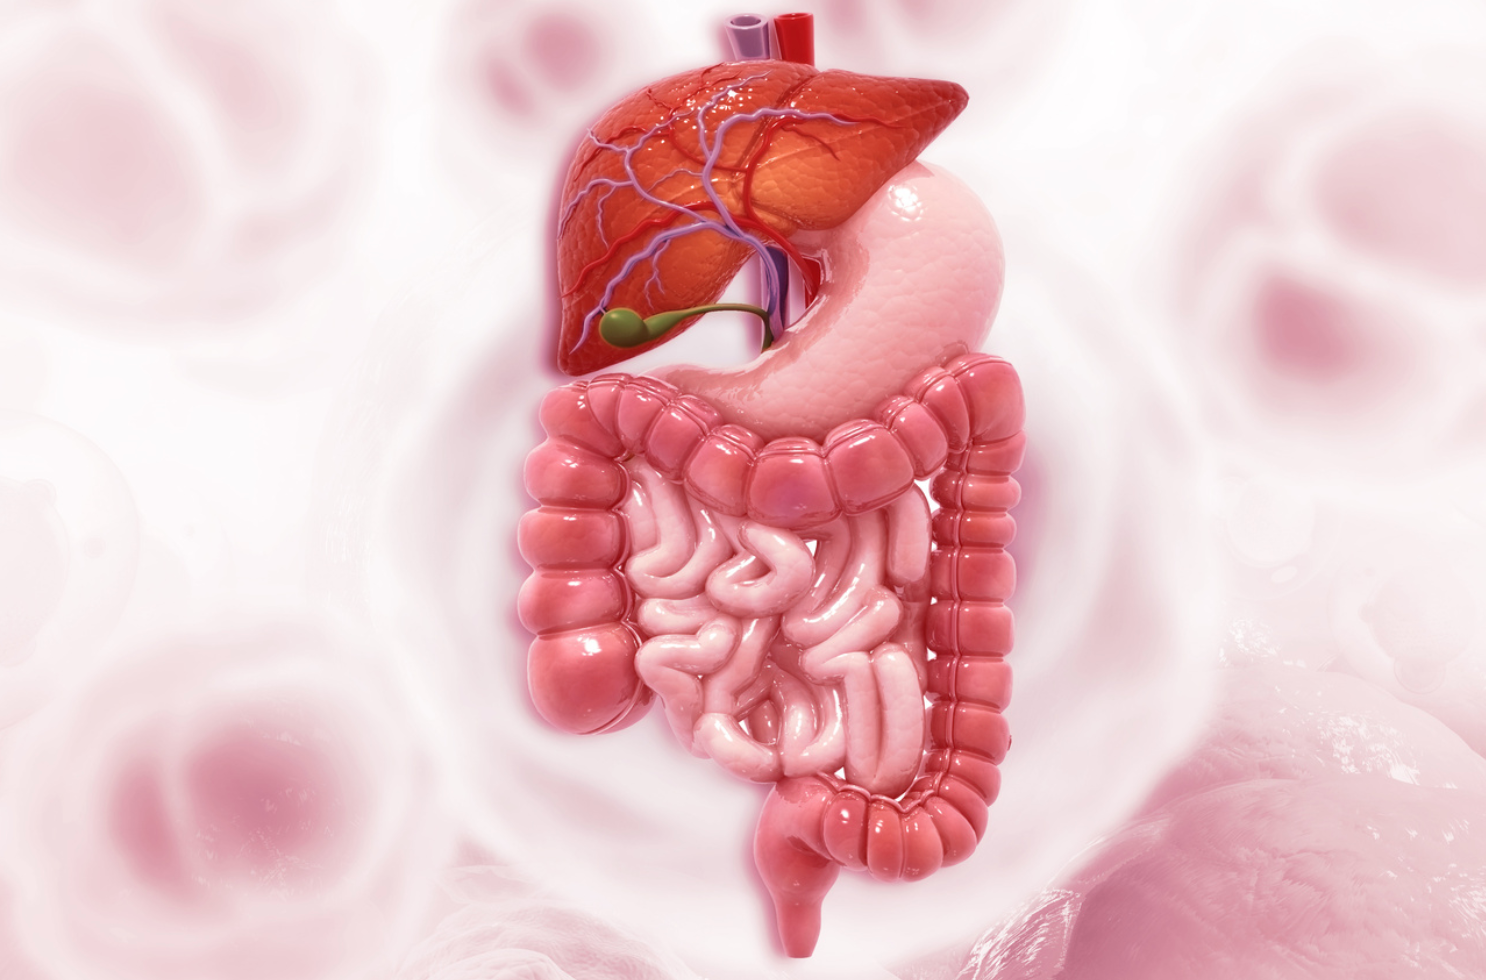 FDA Approves Upadacitinib for Moderately to Severely Active Ulcerative Colitis